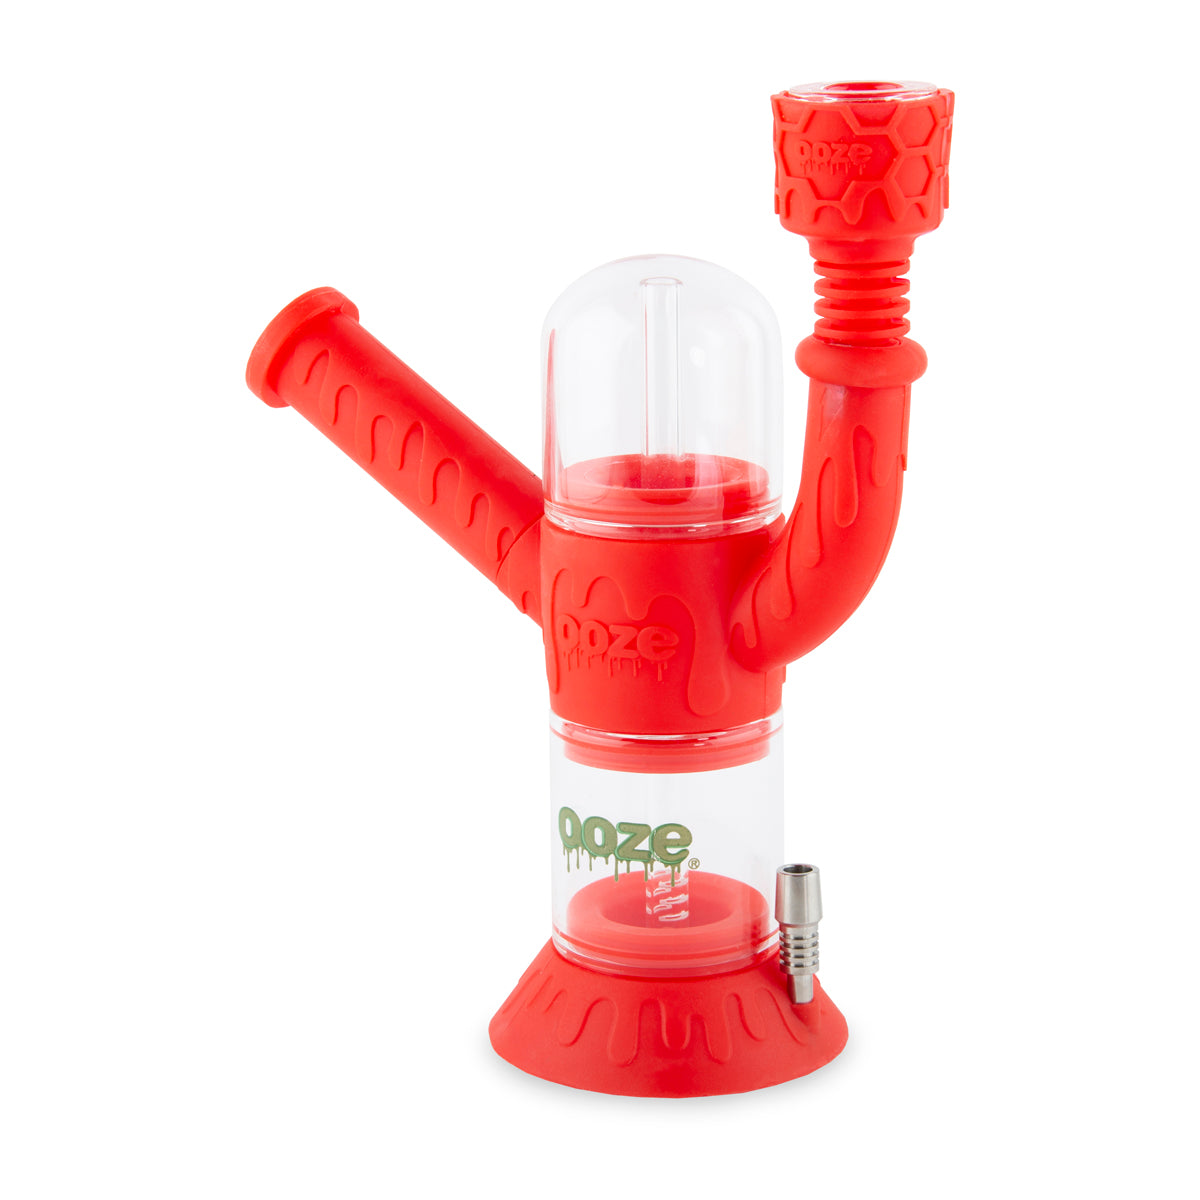 red ooze water pipe